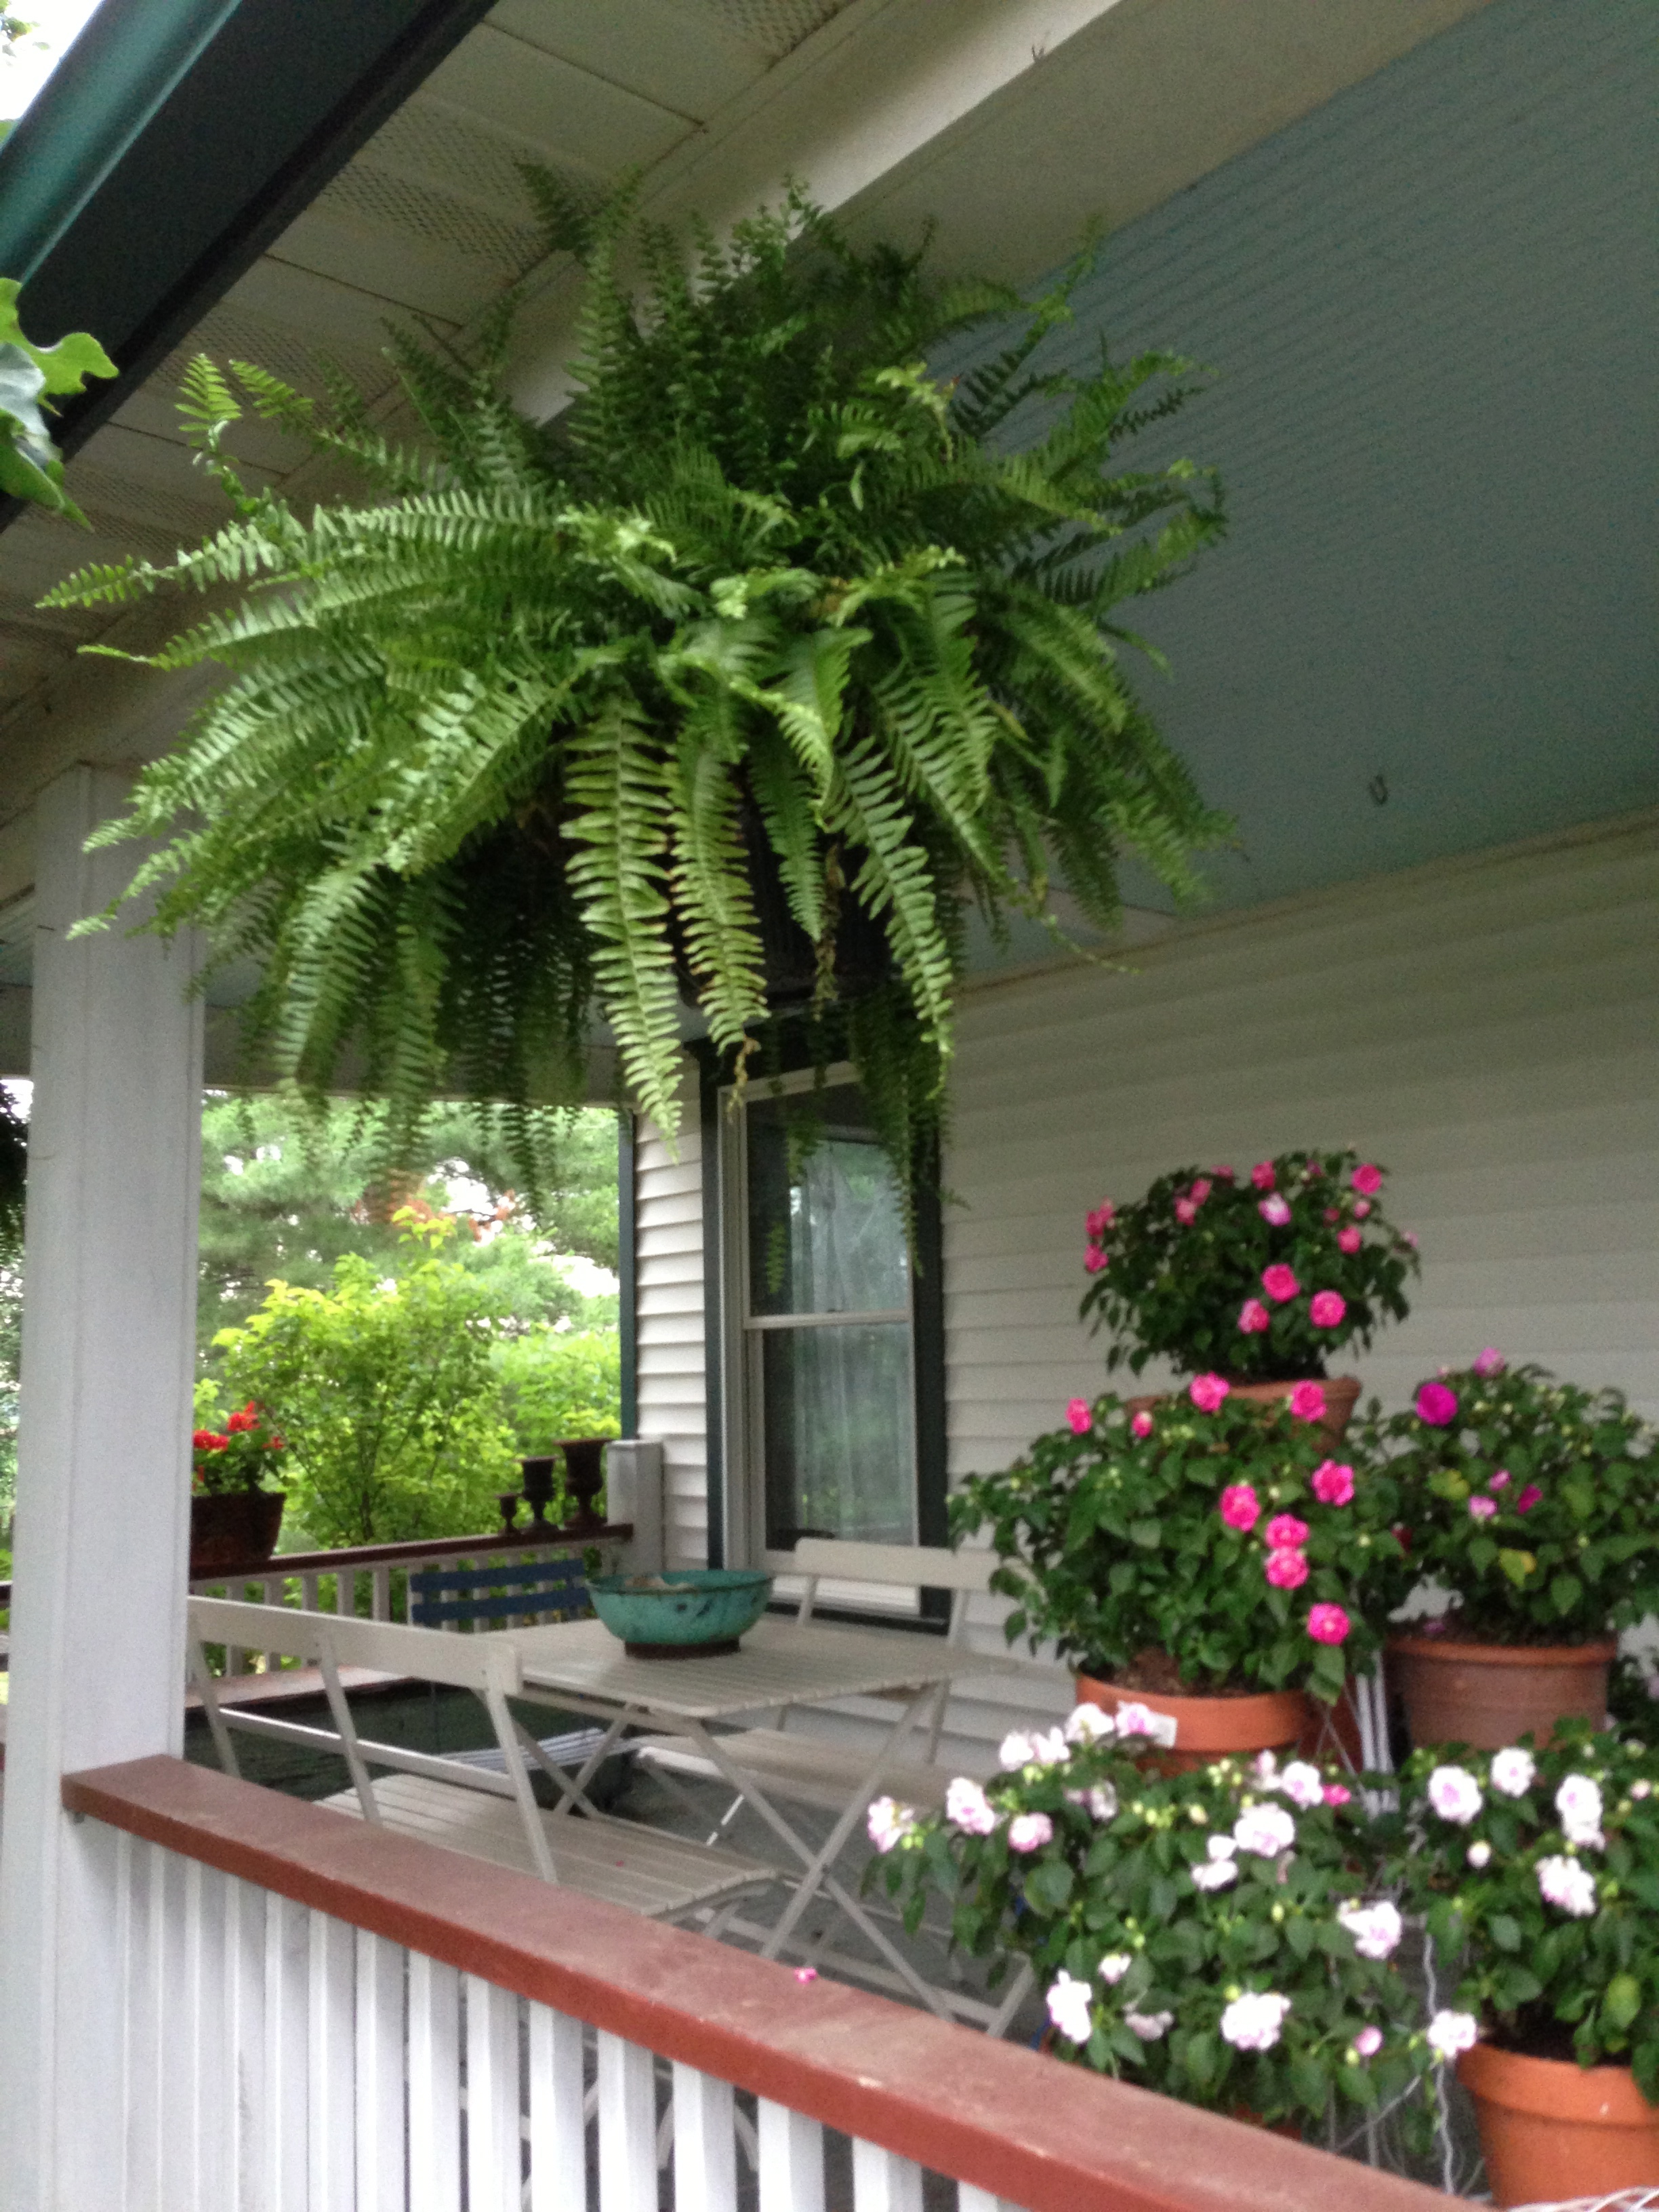 Hanging Boston ferns add lovely lushness to summer porches.